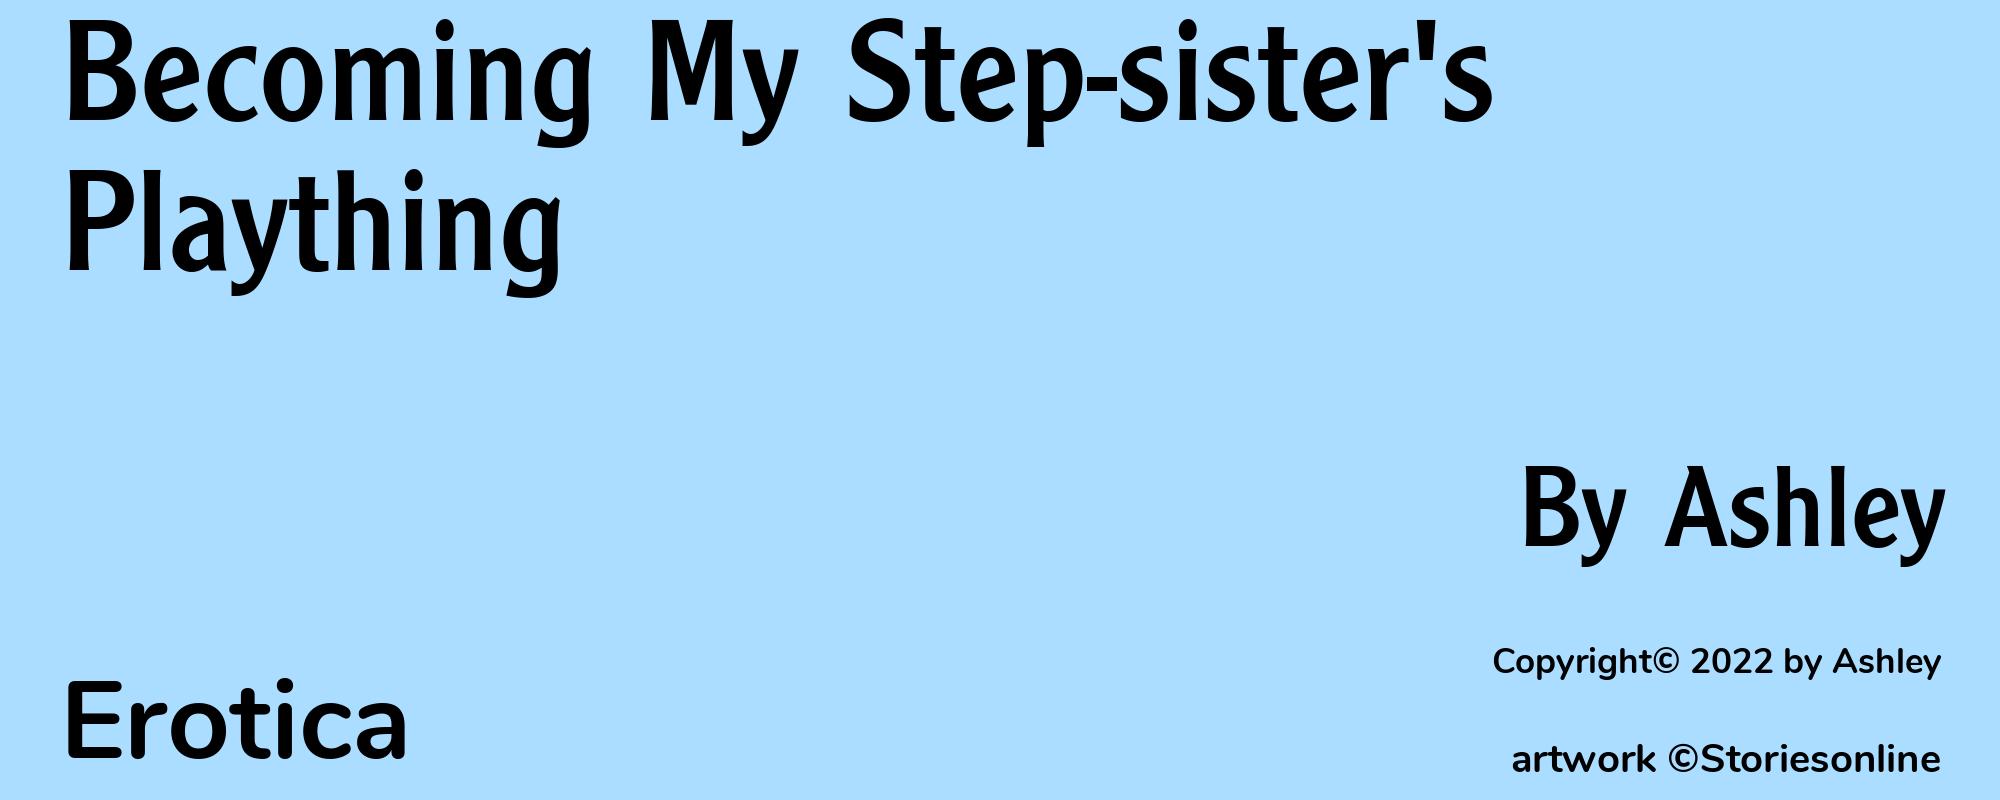 Becoming My Step-sister's Plaything - Cover